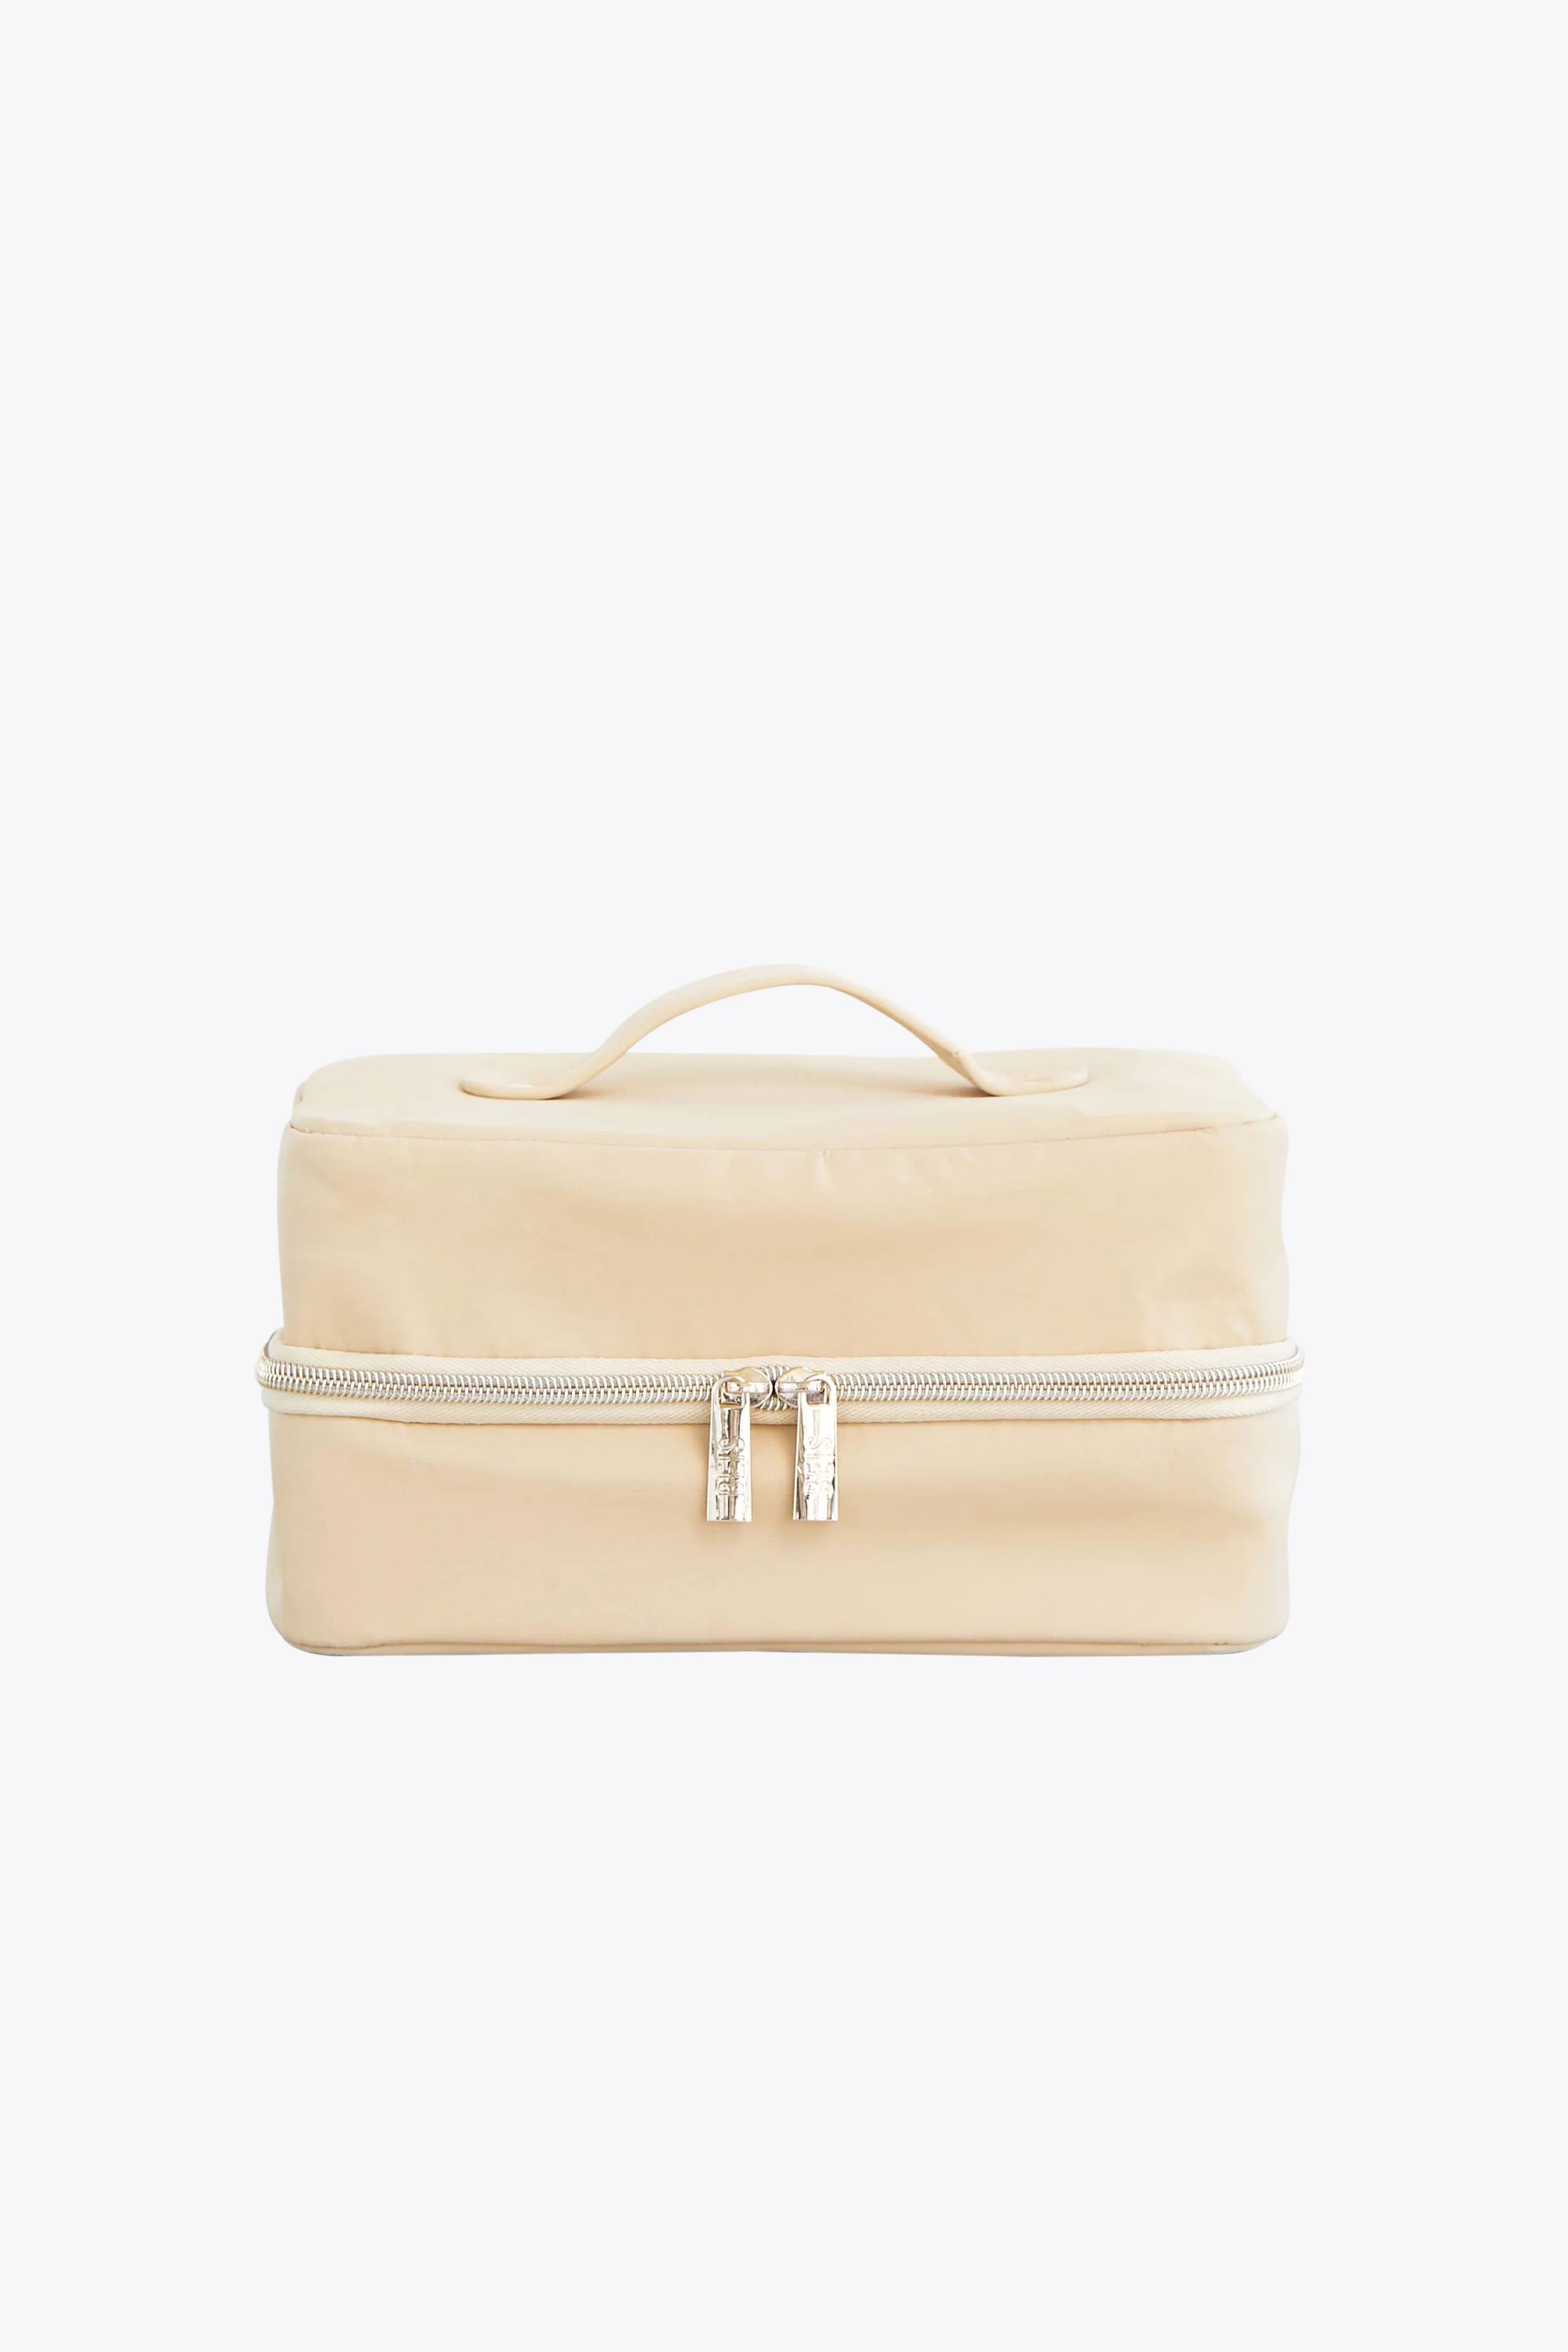 BÉIS 'The Hanging Cosmetic Case' in Beige - Hanging Toiletry Bag & Cosmetic Case | BÉIS Travel